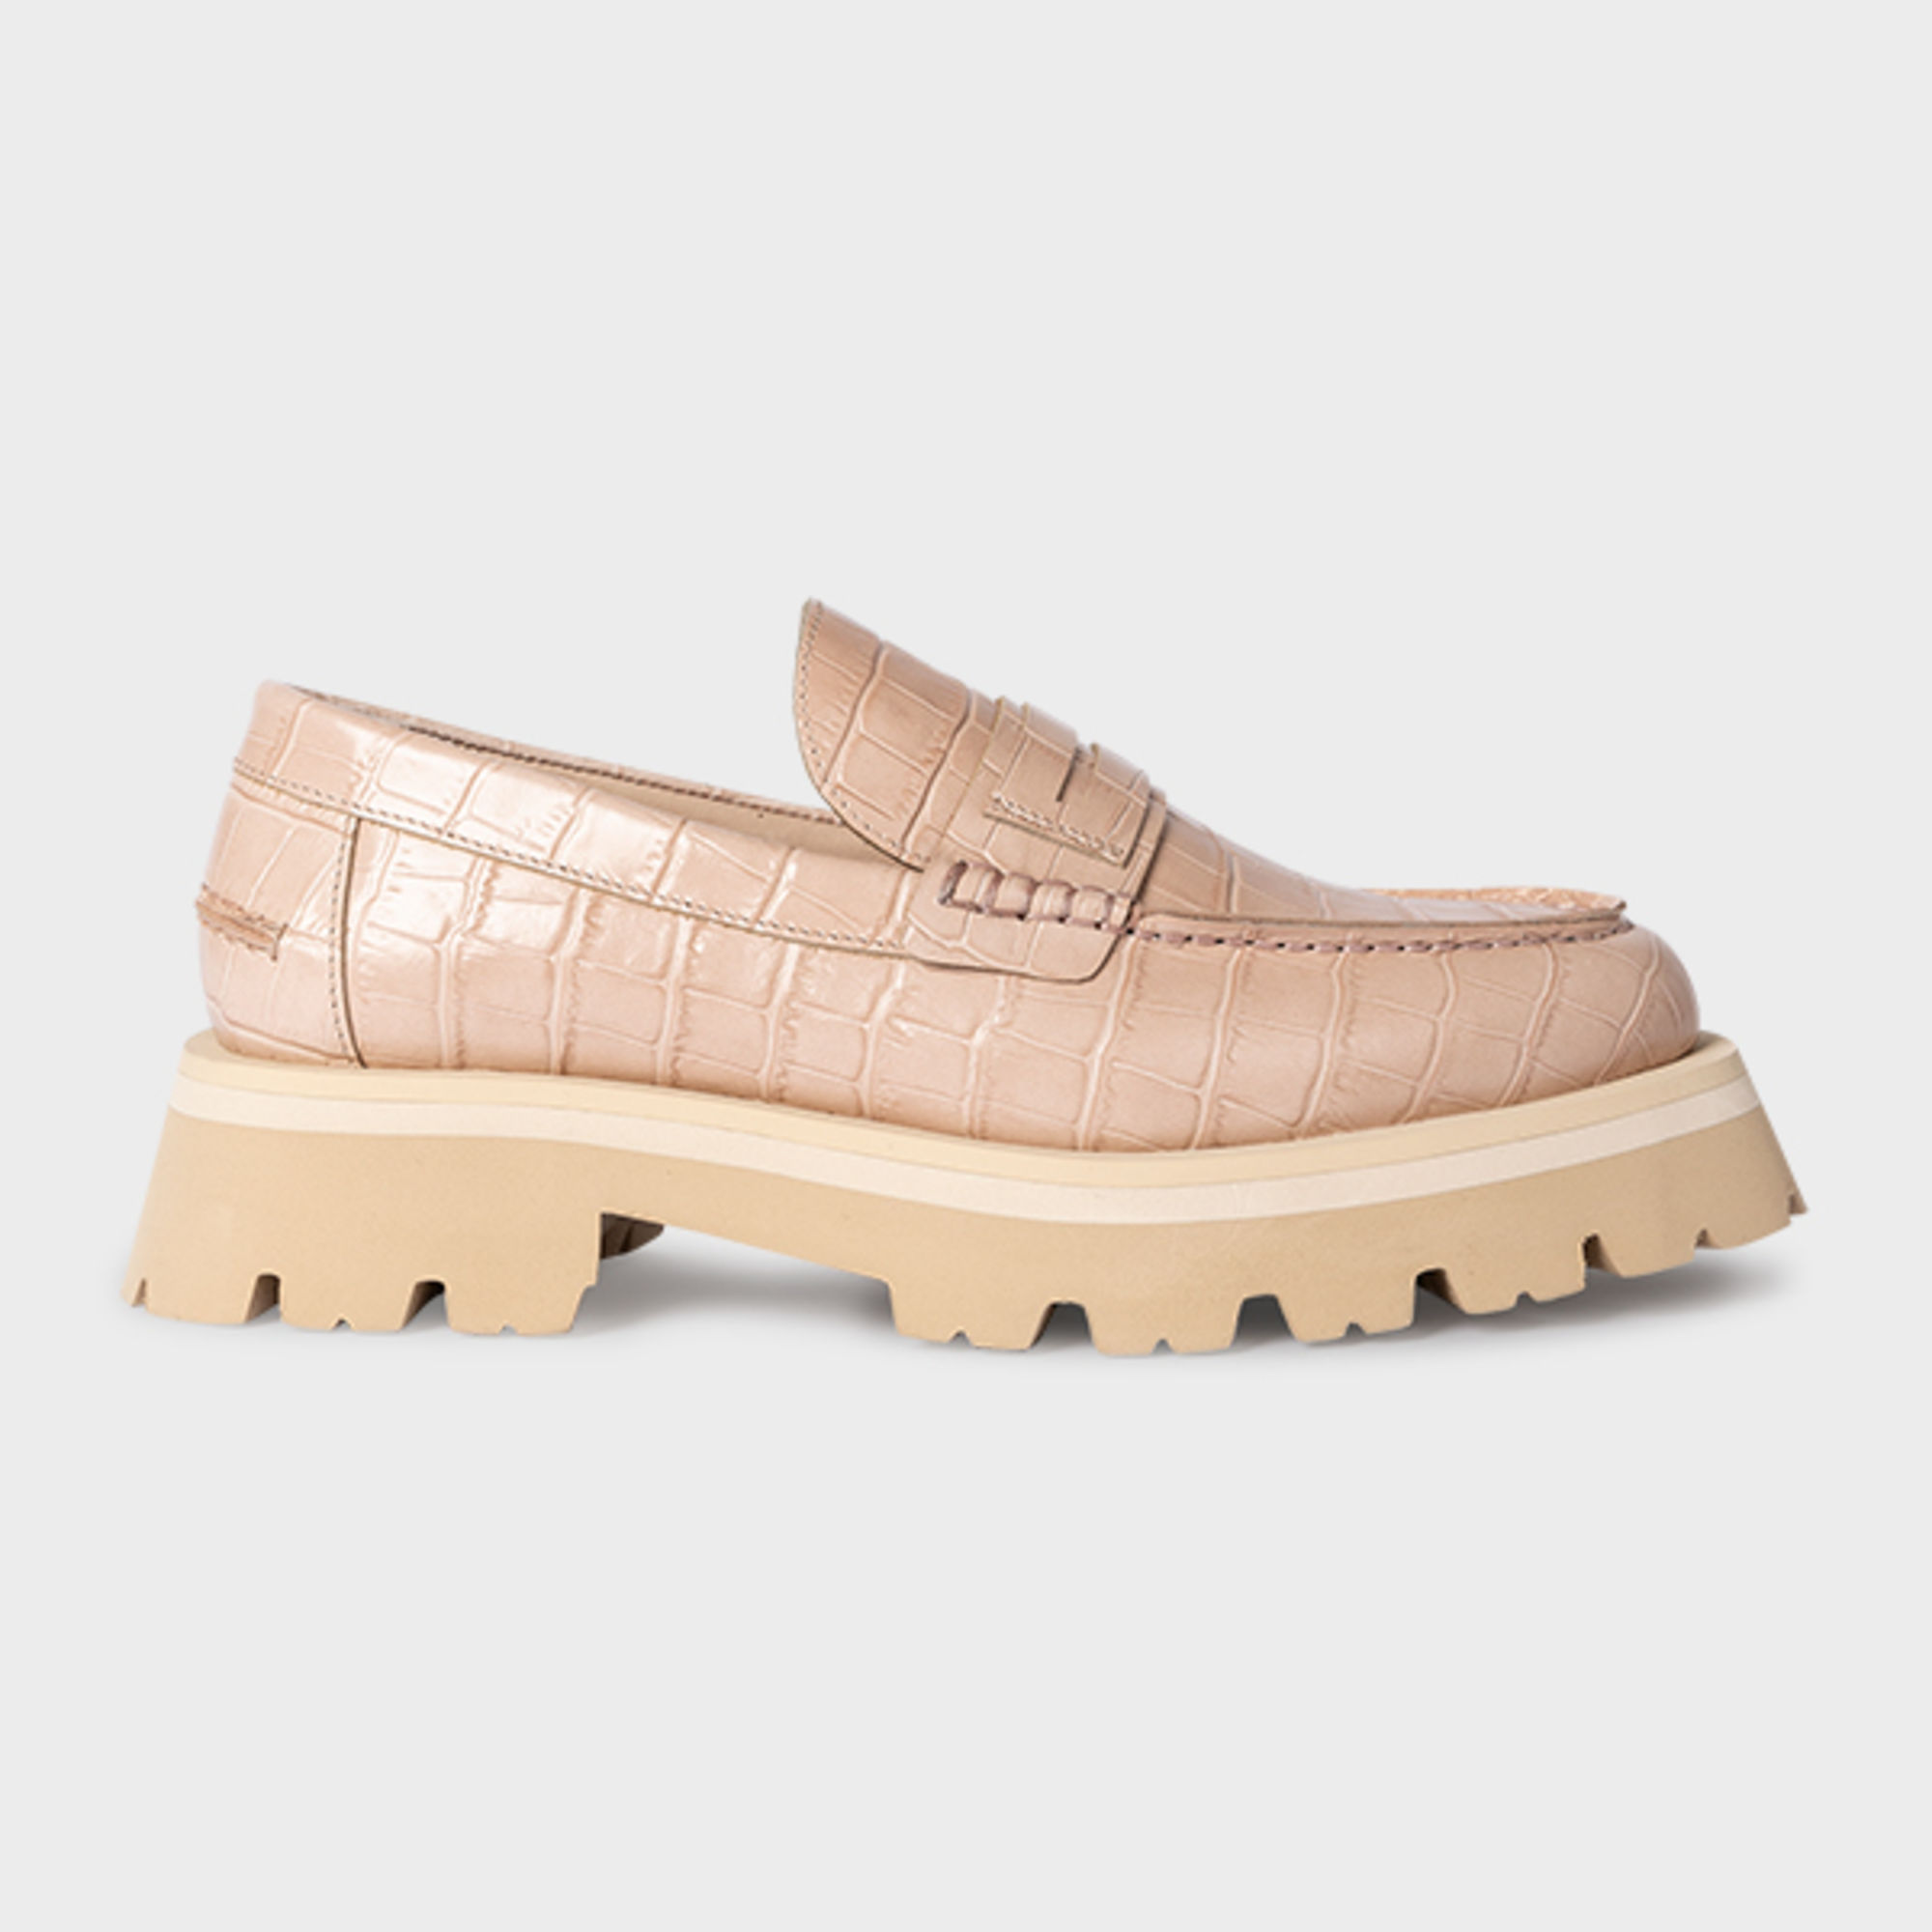 PAUL SMITH WOMEN'S NUDE LEATHER 'FELICITY' LOAFERS BROWN